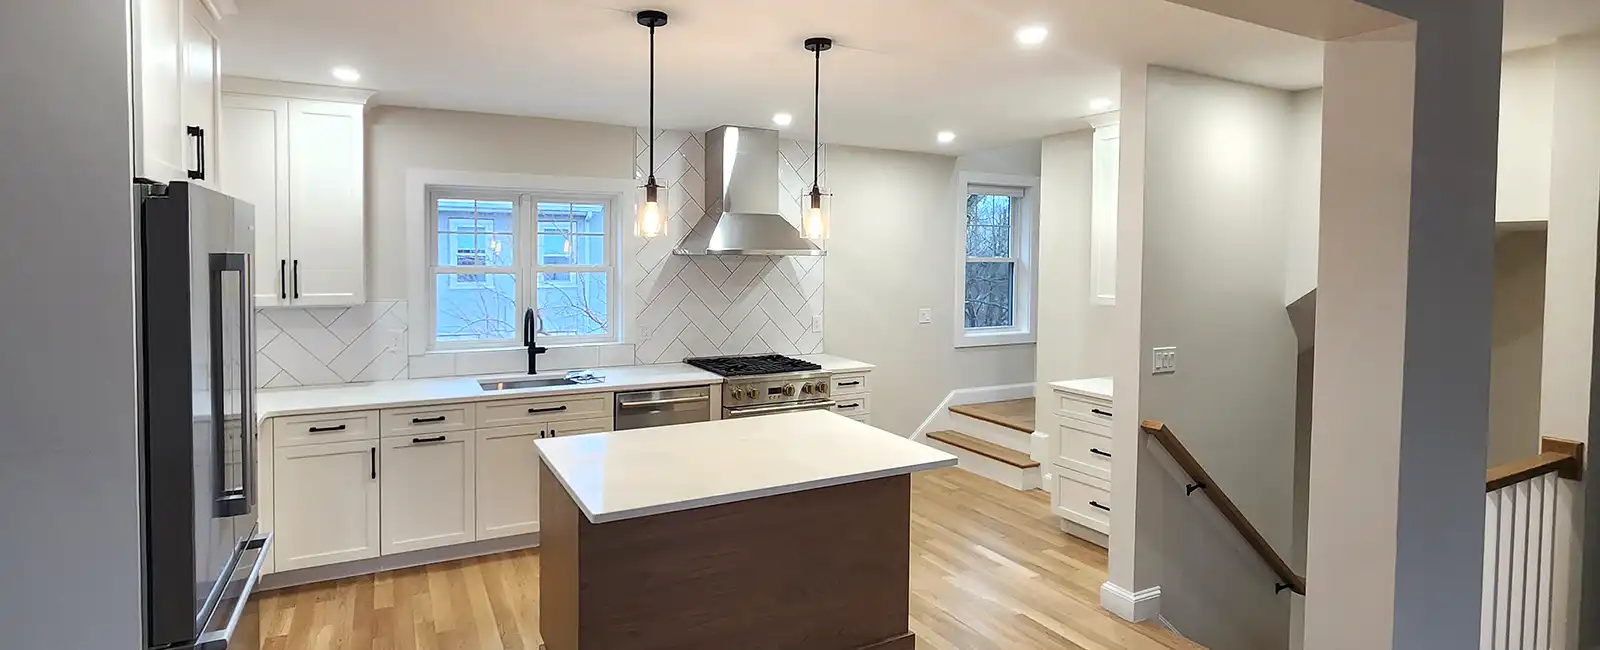 Kitchen Renovation with island counter top